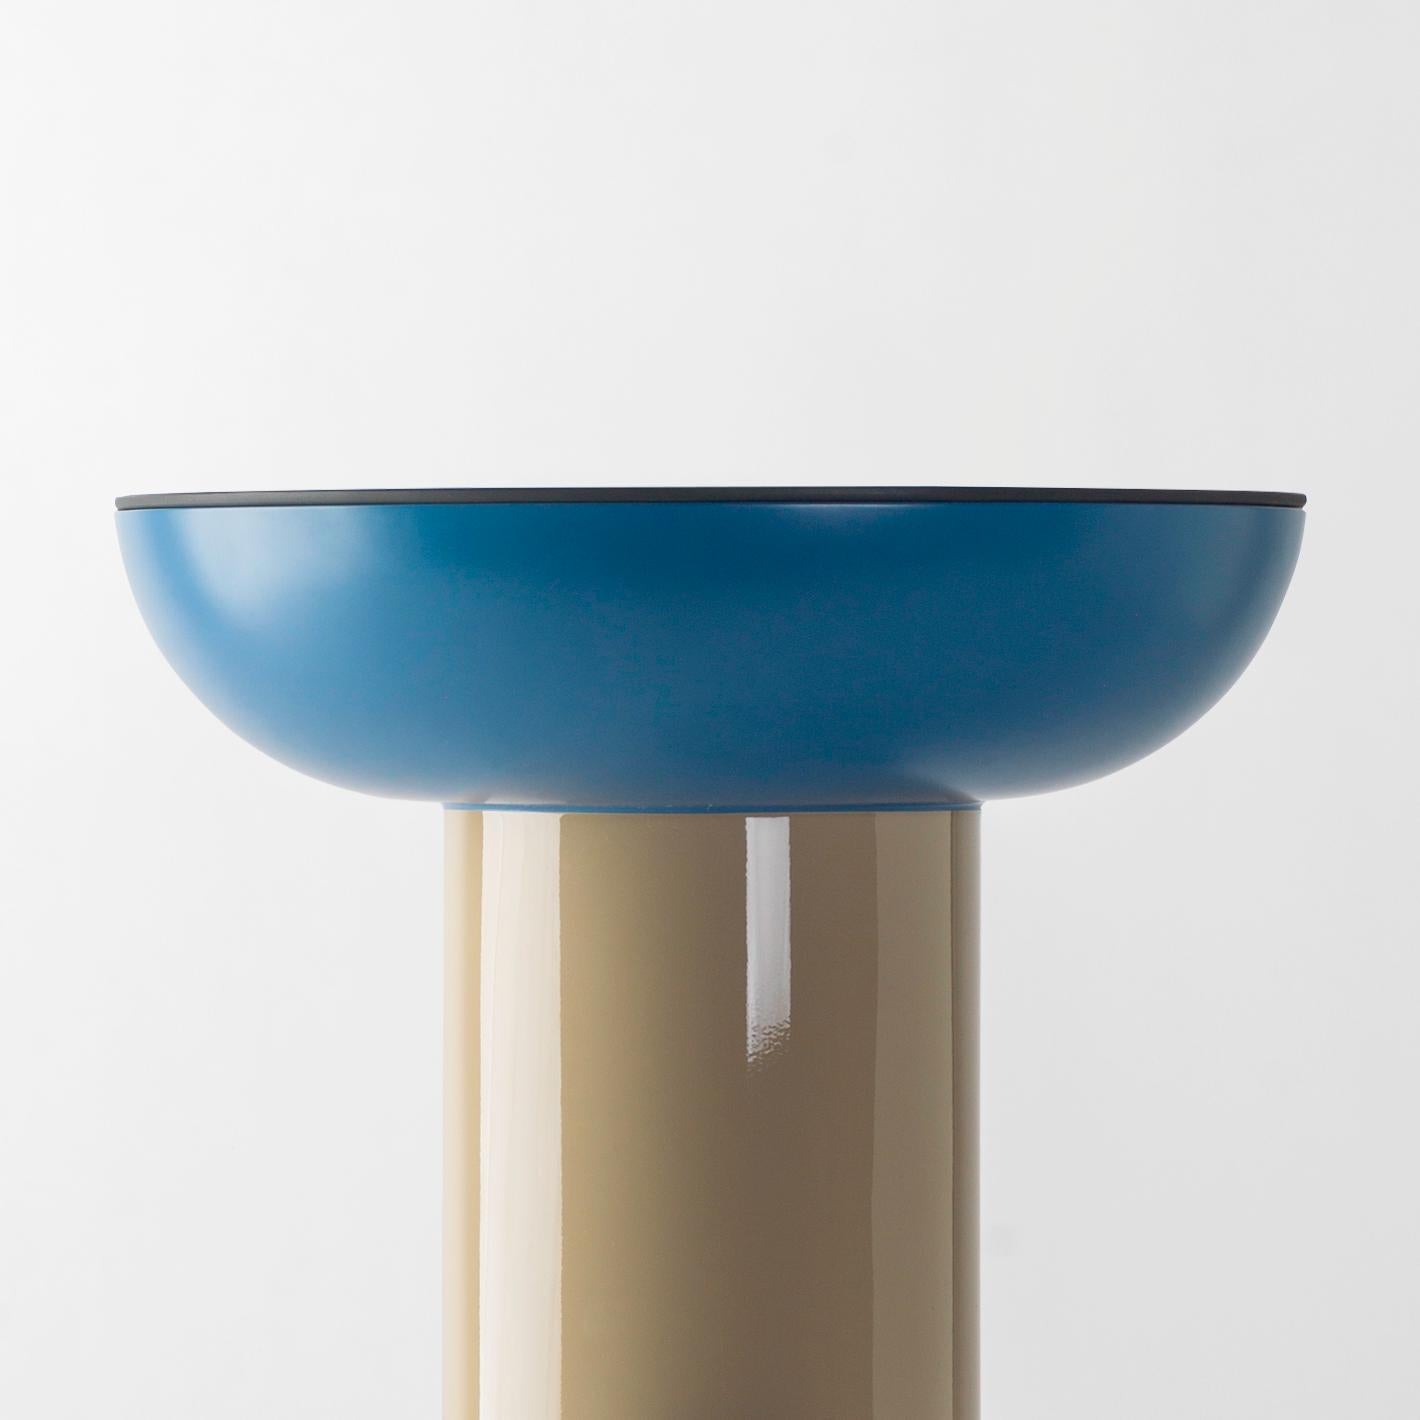 Multicolor explorer #01 table

Design by Jaime Hayon, 2019
Manufactured by BD Barcelona.

Lacquered fibreglass body. Solid turned wooden legs and lacquered. Painted glass table top.

Measures: 40 Ø x 50 cm

- Glass: RAL 7021
- Top: RAL